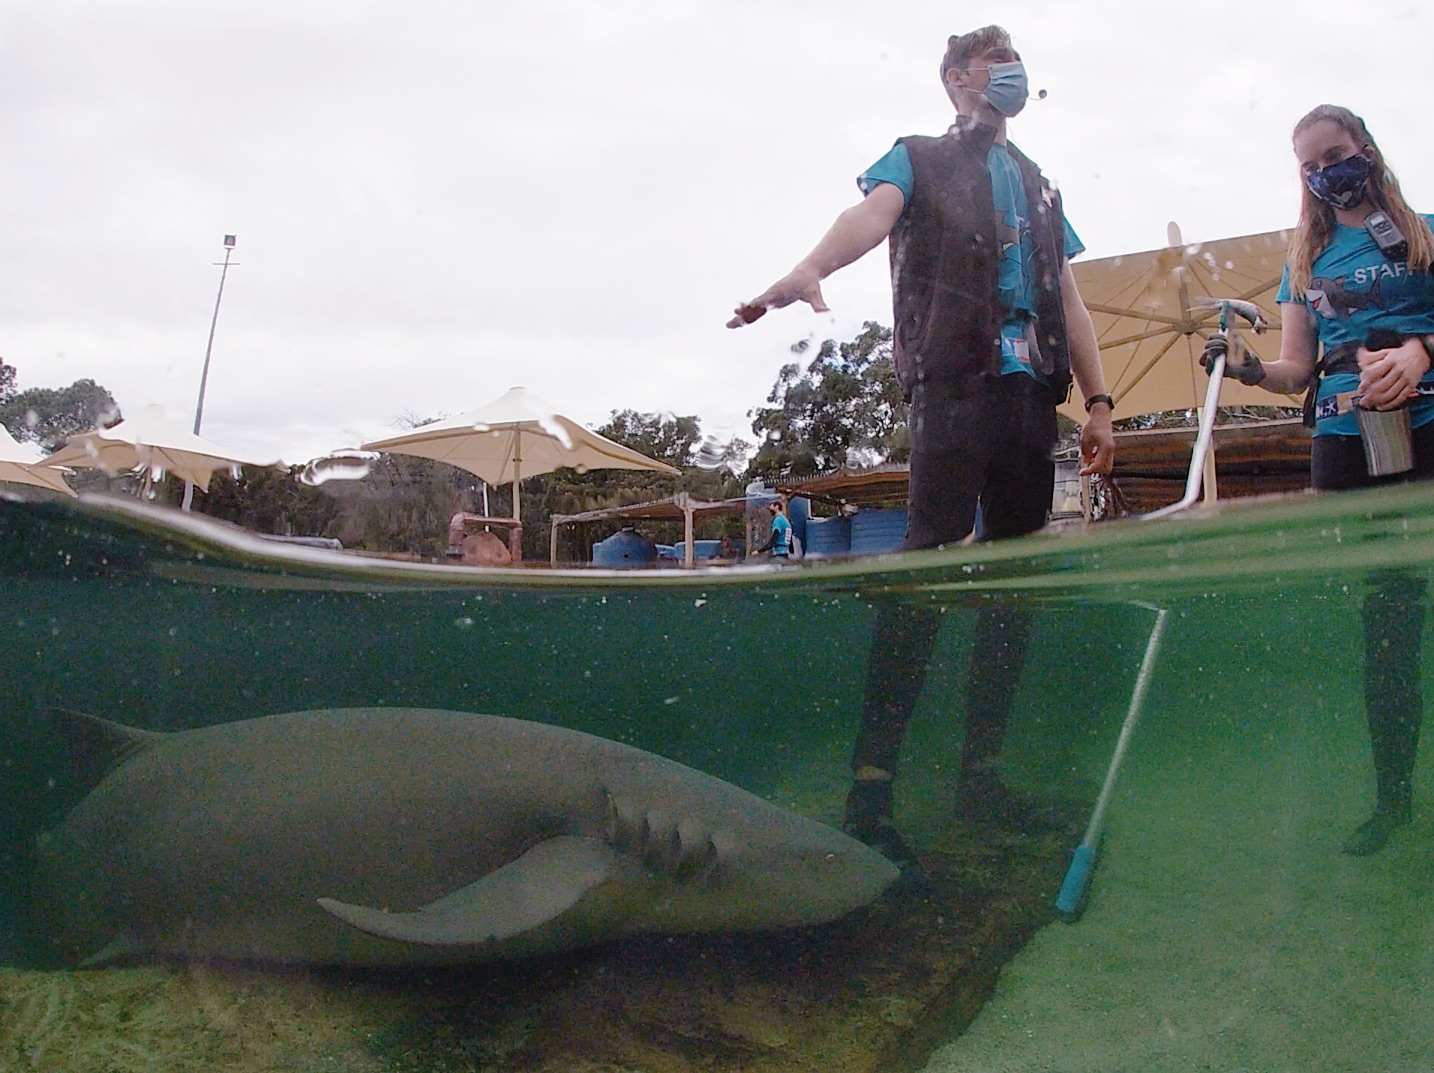 Reef Shark Encounter & Feed $80 packaged with Entry Pass (ages 12+)